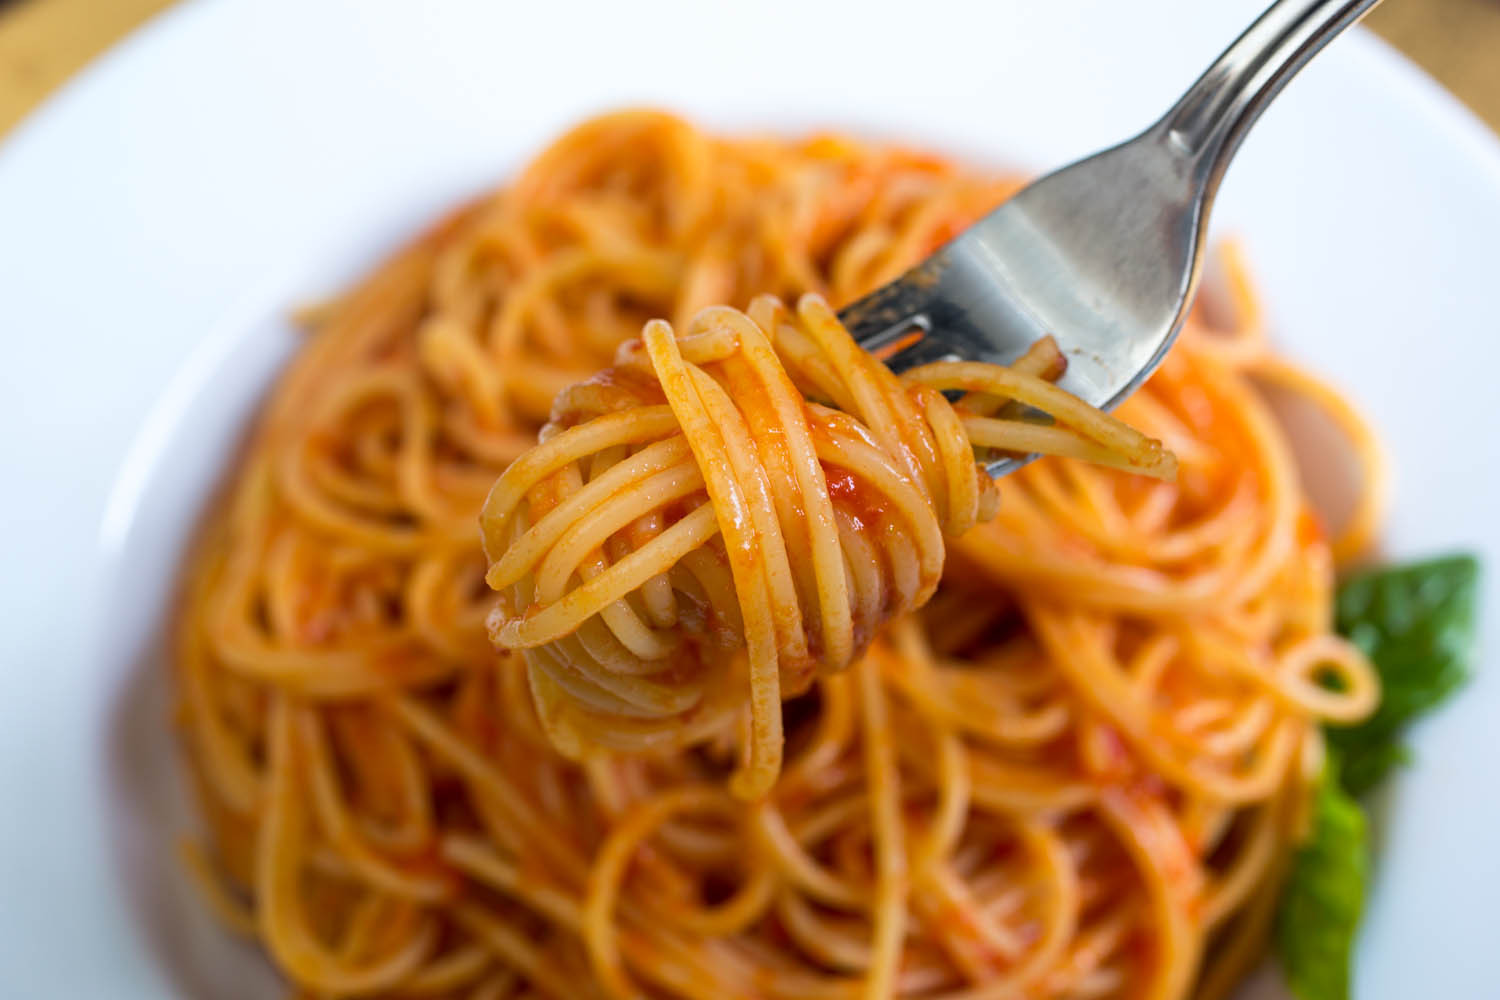 Homemade Pasta Sauce With Fresh Tomatoes
 How to Make the Best Tomato Sauce From Fresh Tomatoes